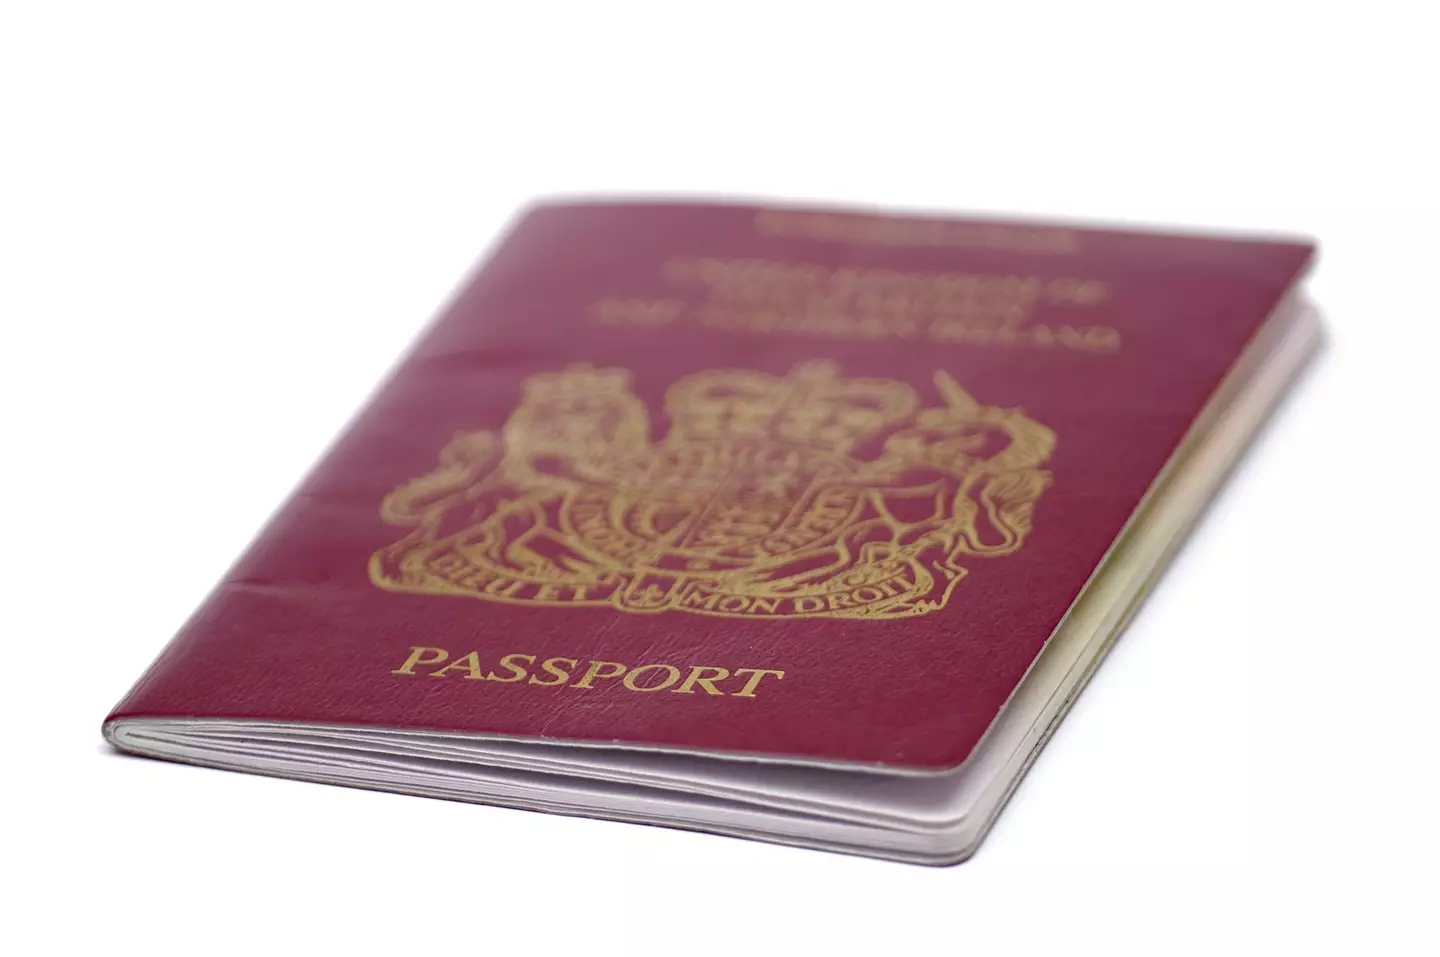 The old-style UK red passport.